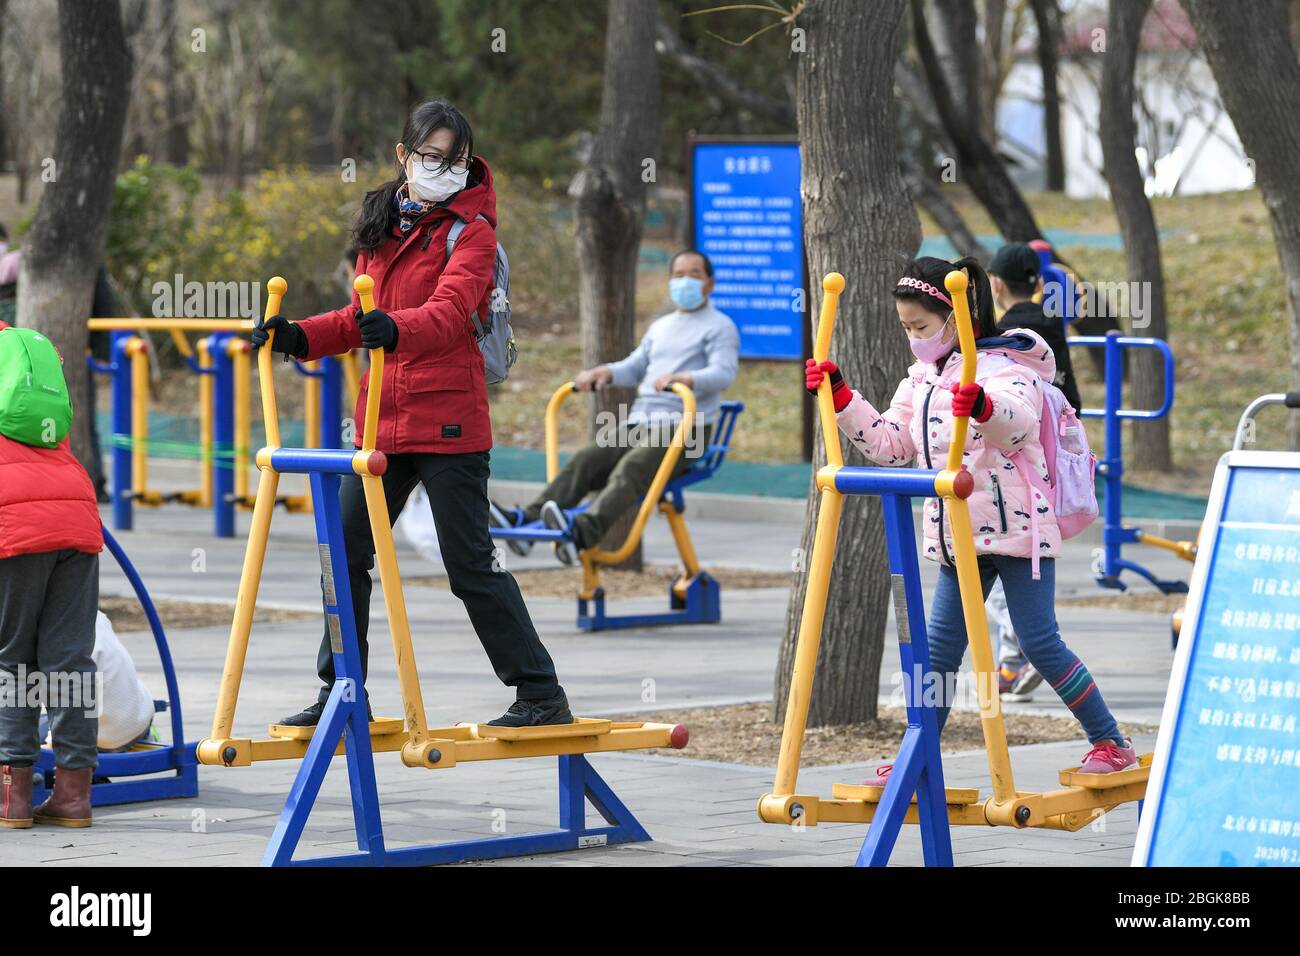 Citizens do exercise by jogging or with fitness equipment at a local park  as weather warms up, Beijing, China, 12 March 2020. *** Local Caption ***  fa Stock Photo - Alamy